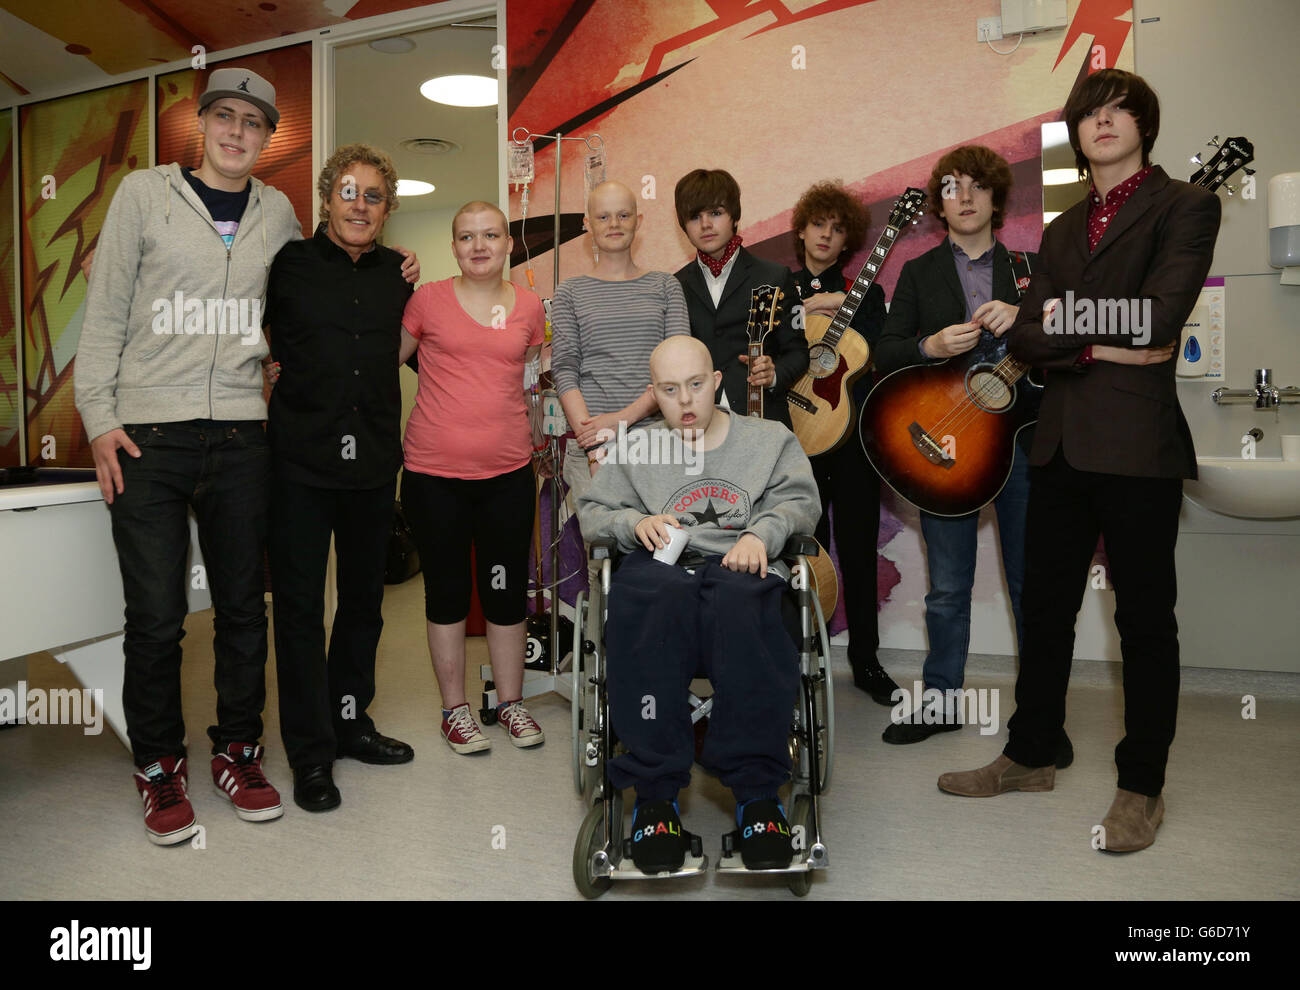 Roger Daltrey CBE (2nd left), Patron of Teenage Cancer Trust, with current patients Will Hunt (left), Heidi Smith (3rd left) Madaleine Zachry and Peter Londors, and new band The Strypes Josh McClorey (4th right), Evan Walsh (3rd right), Pete O'Hanlon and Ross Farrelly, during their visit and gig at a specialist Teenage Cancer Trust unit at University College Macmillan Cancer Centre, central London. Stock Photo